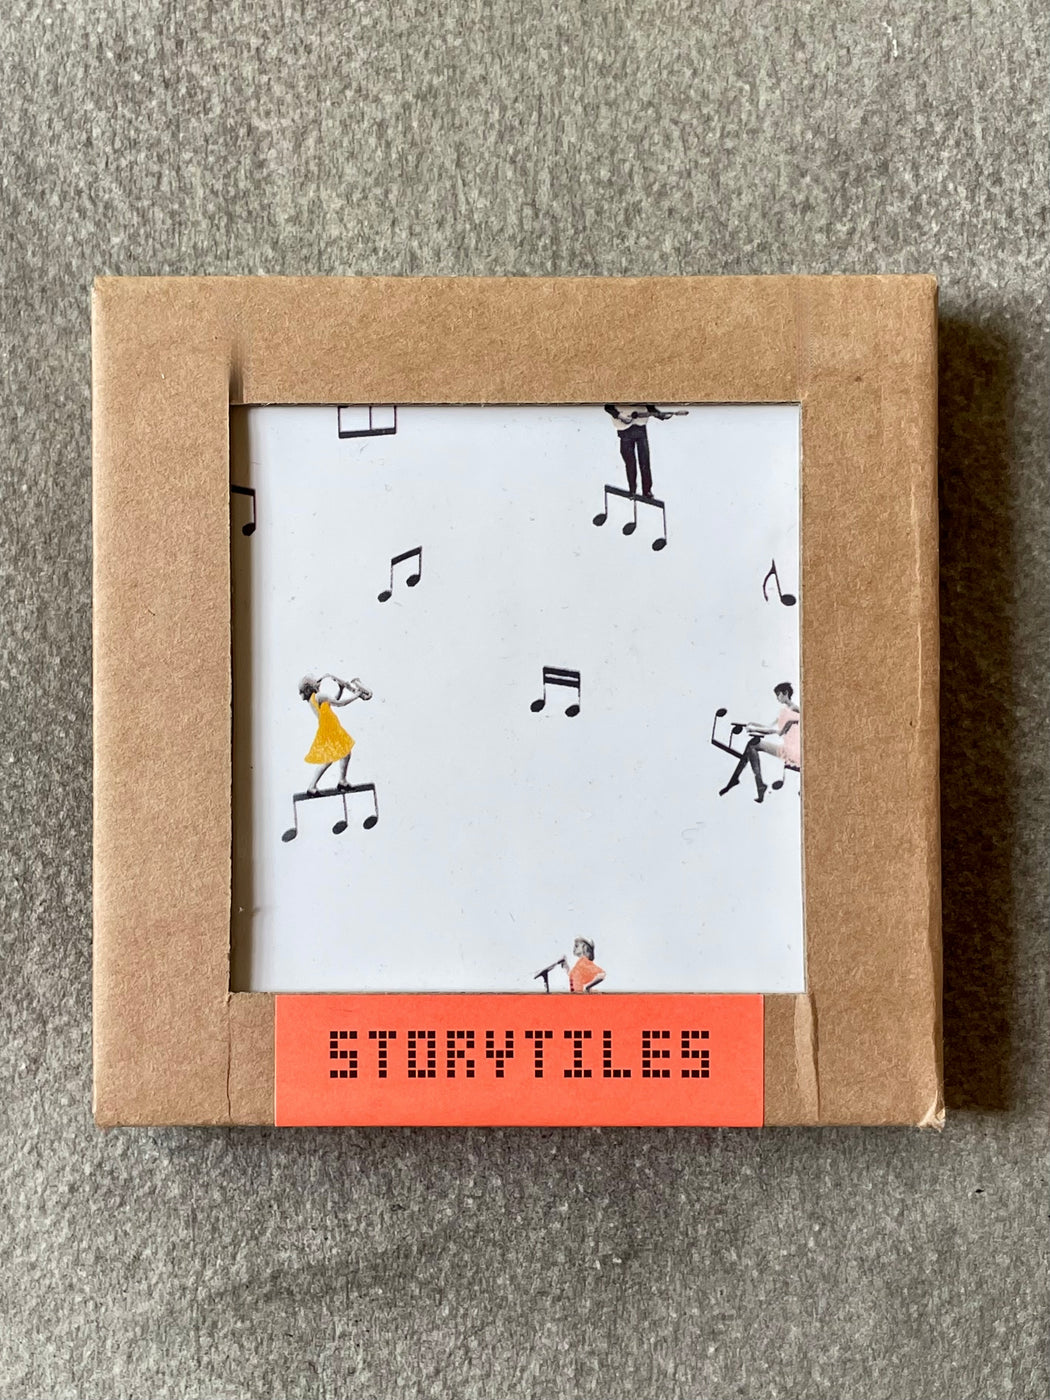 "There's Music in the Air" Story Tile by Marga Van Oers